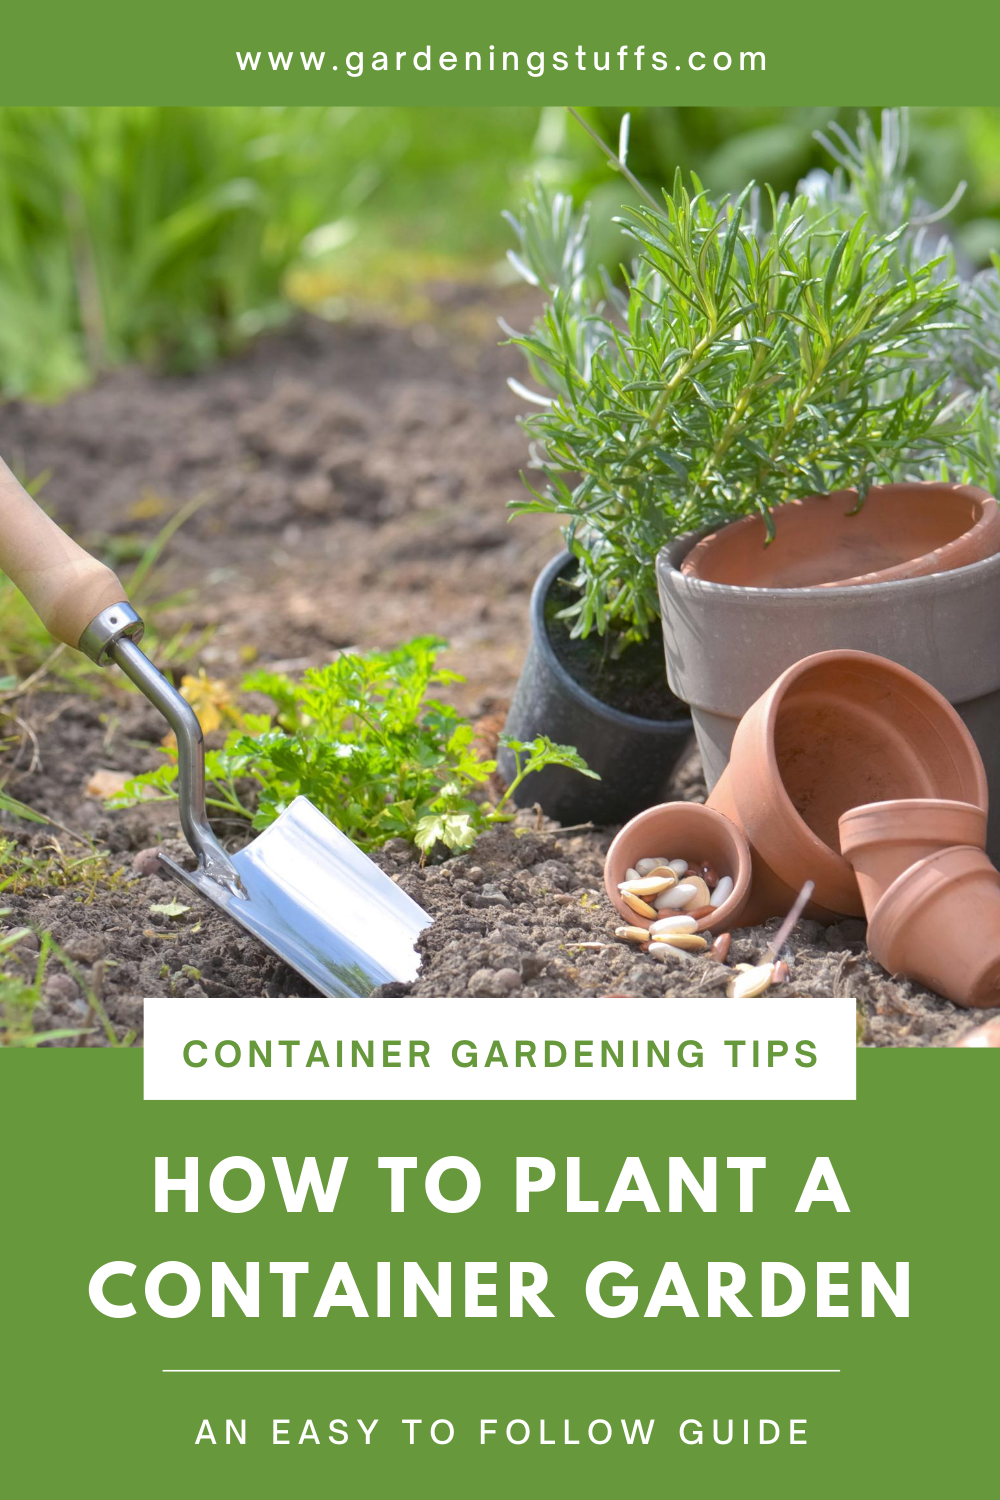 Container gardening is a great alternative to vegetable gardening especially if space is limited. Learn all about it & get tips from the pros today.